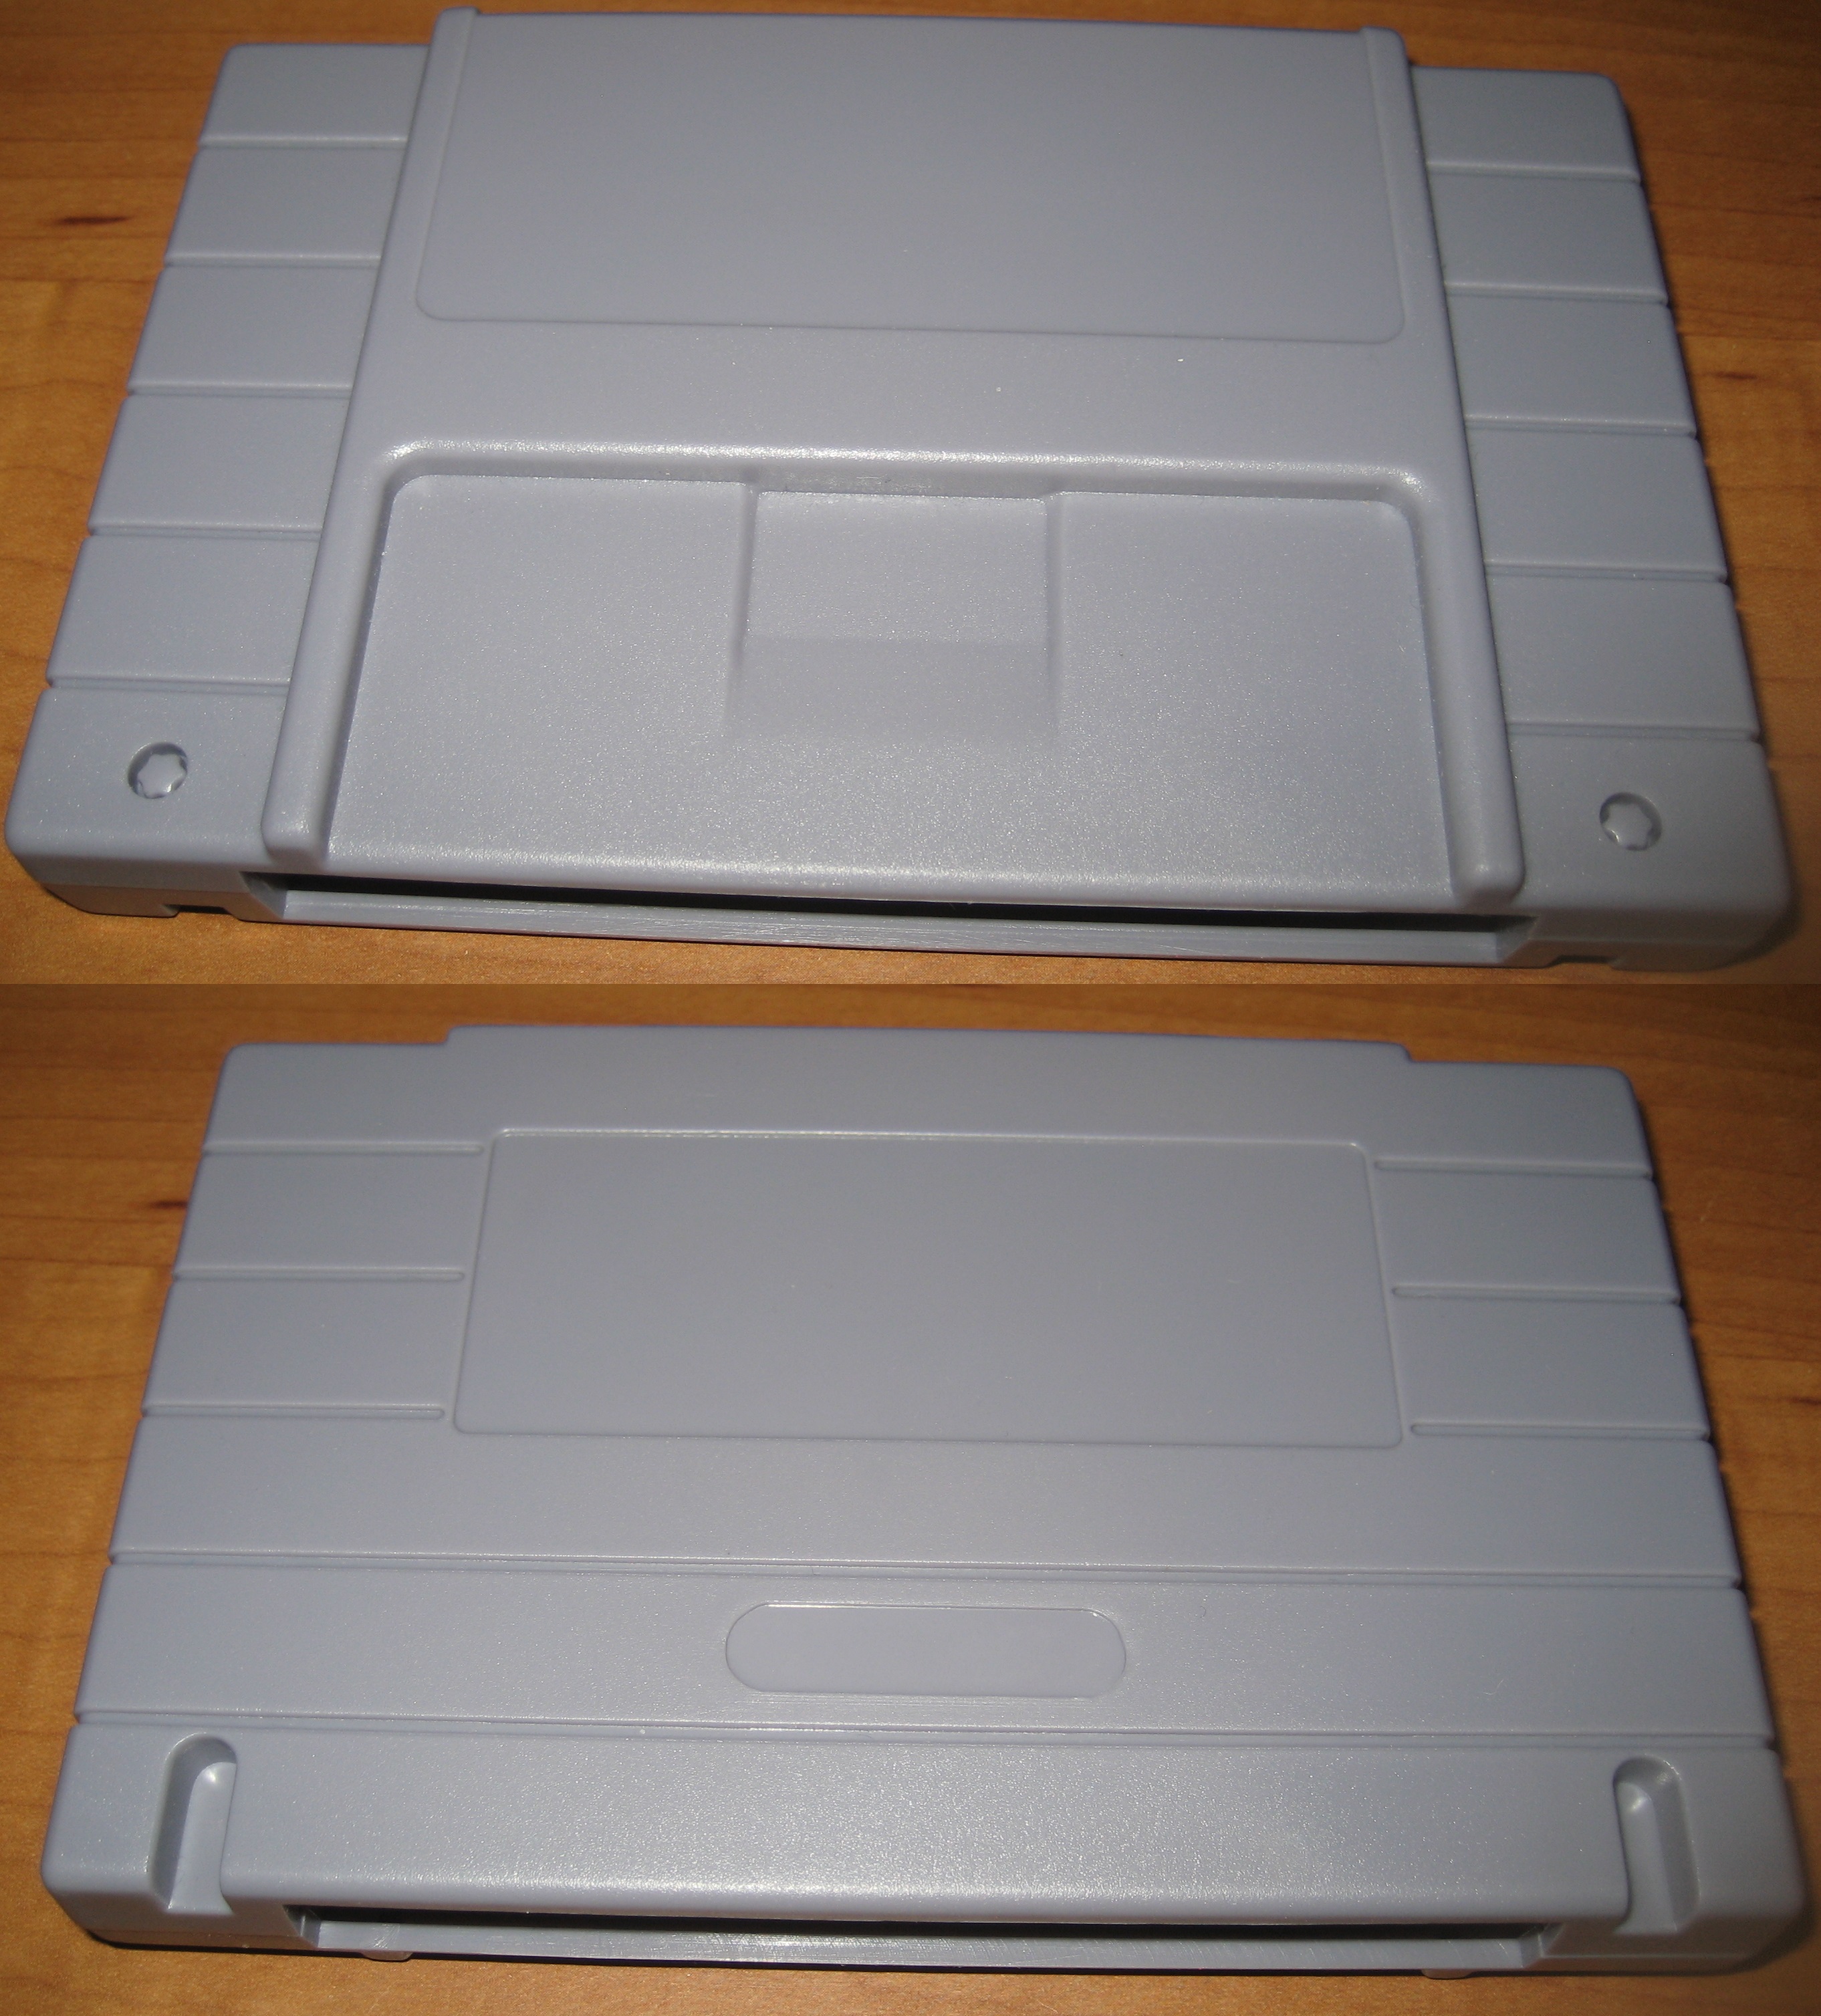 Flash cartridge for SNES lets you get your ROM on